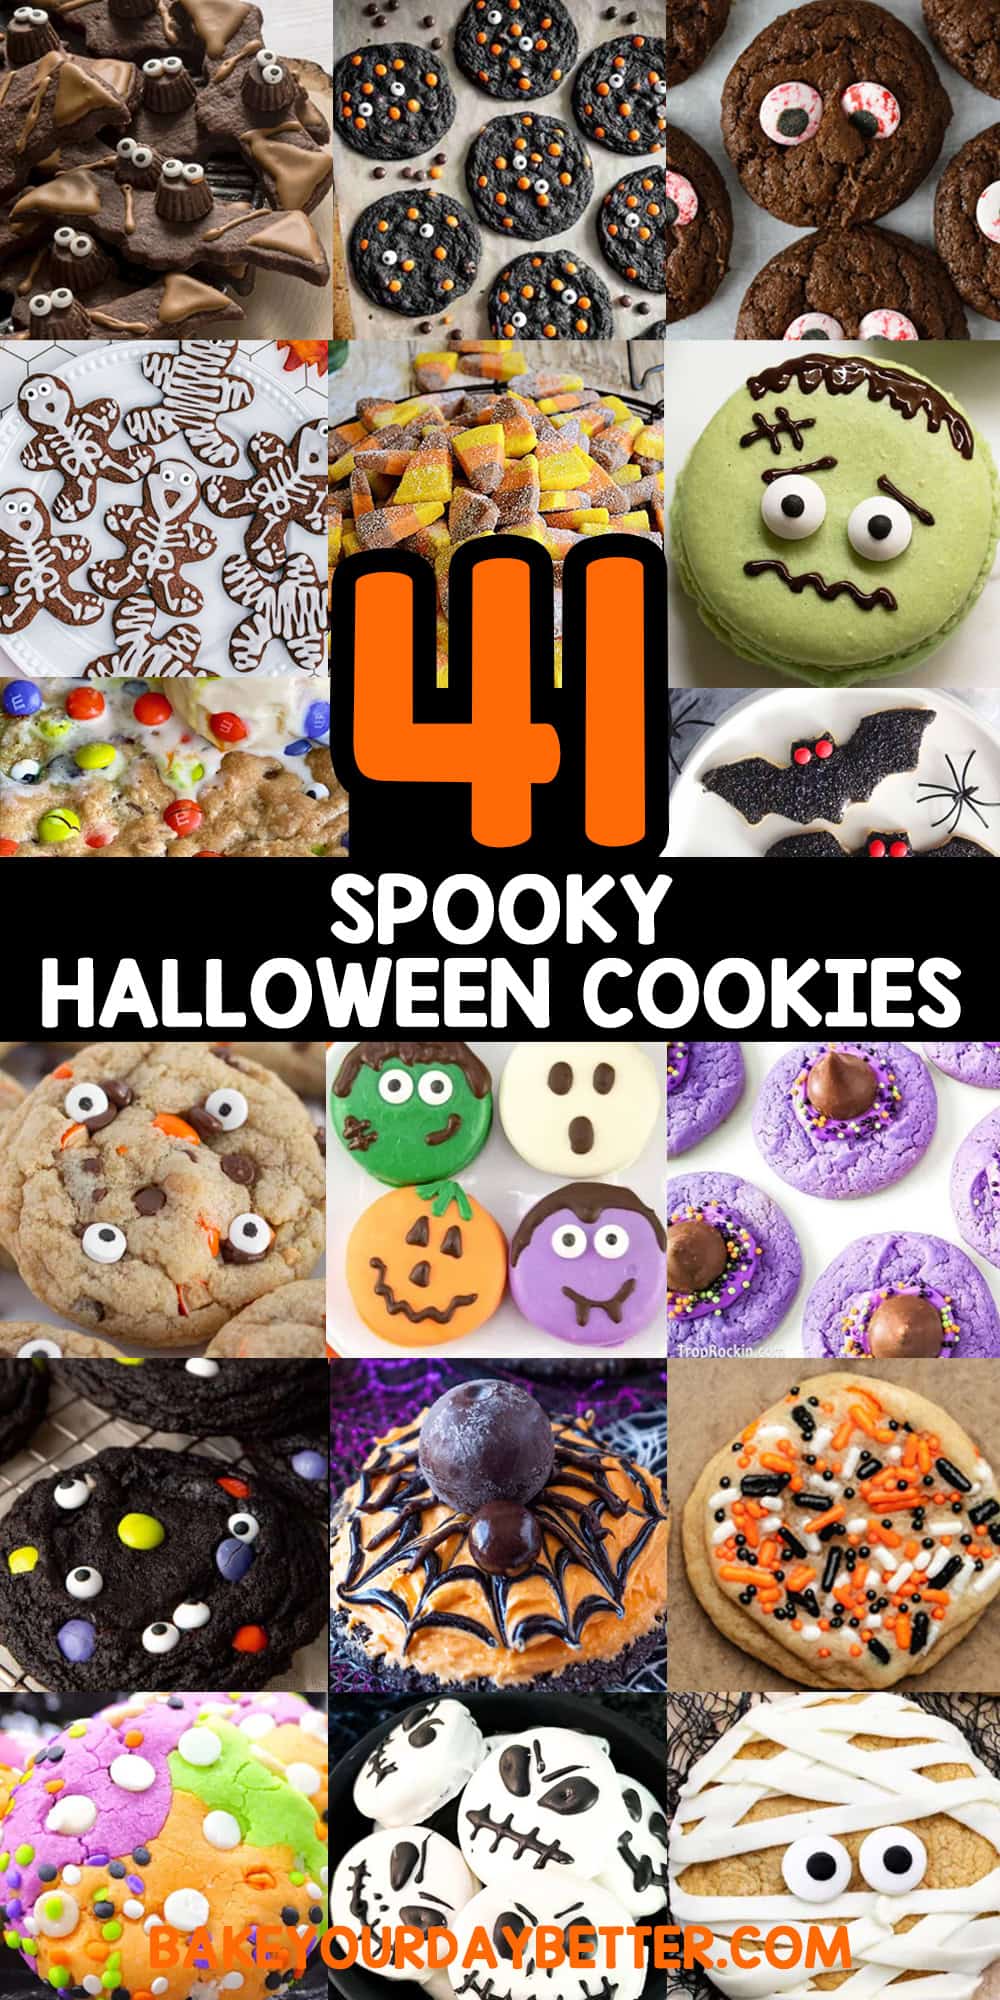 pictures of halloween cookies with text overlay that says: 41 spooky halloween cookies